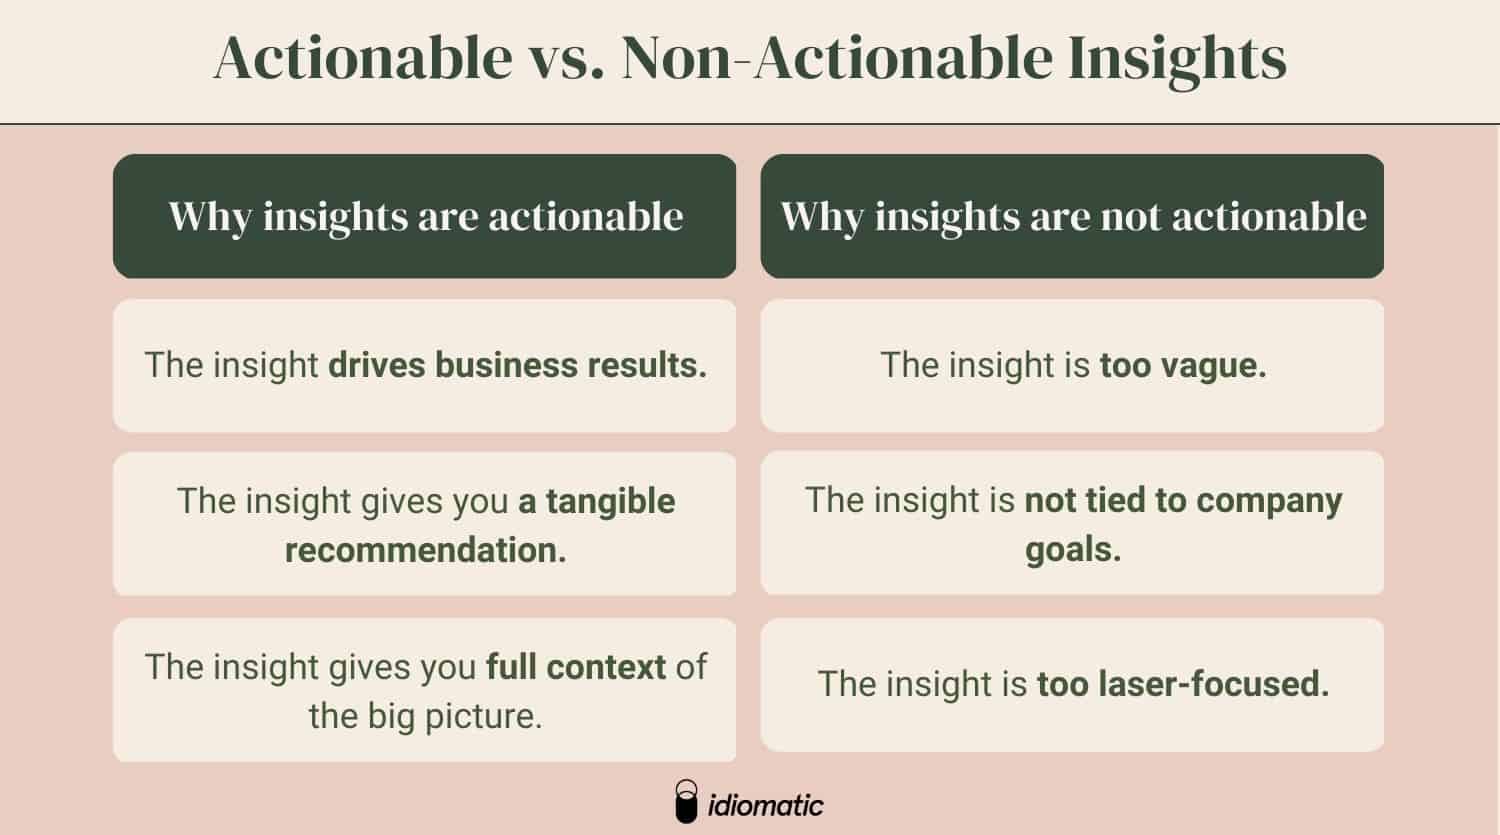 Actionable Vs Non-Actionable Insights